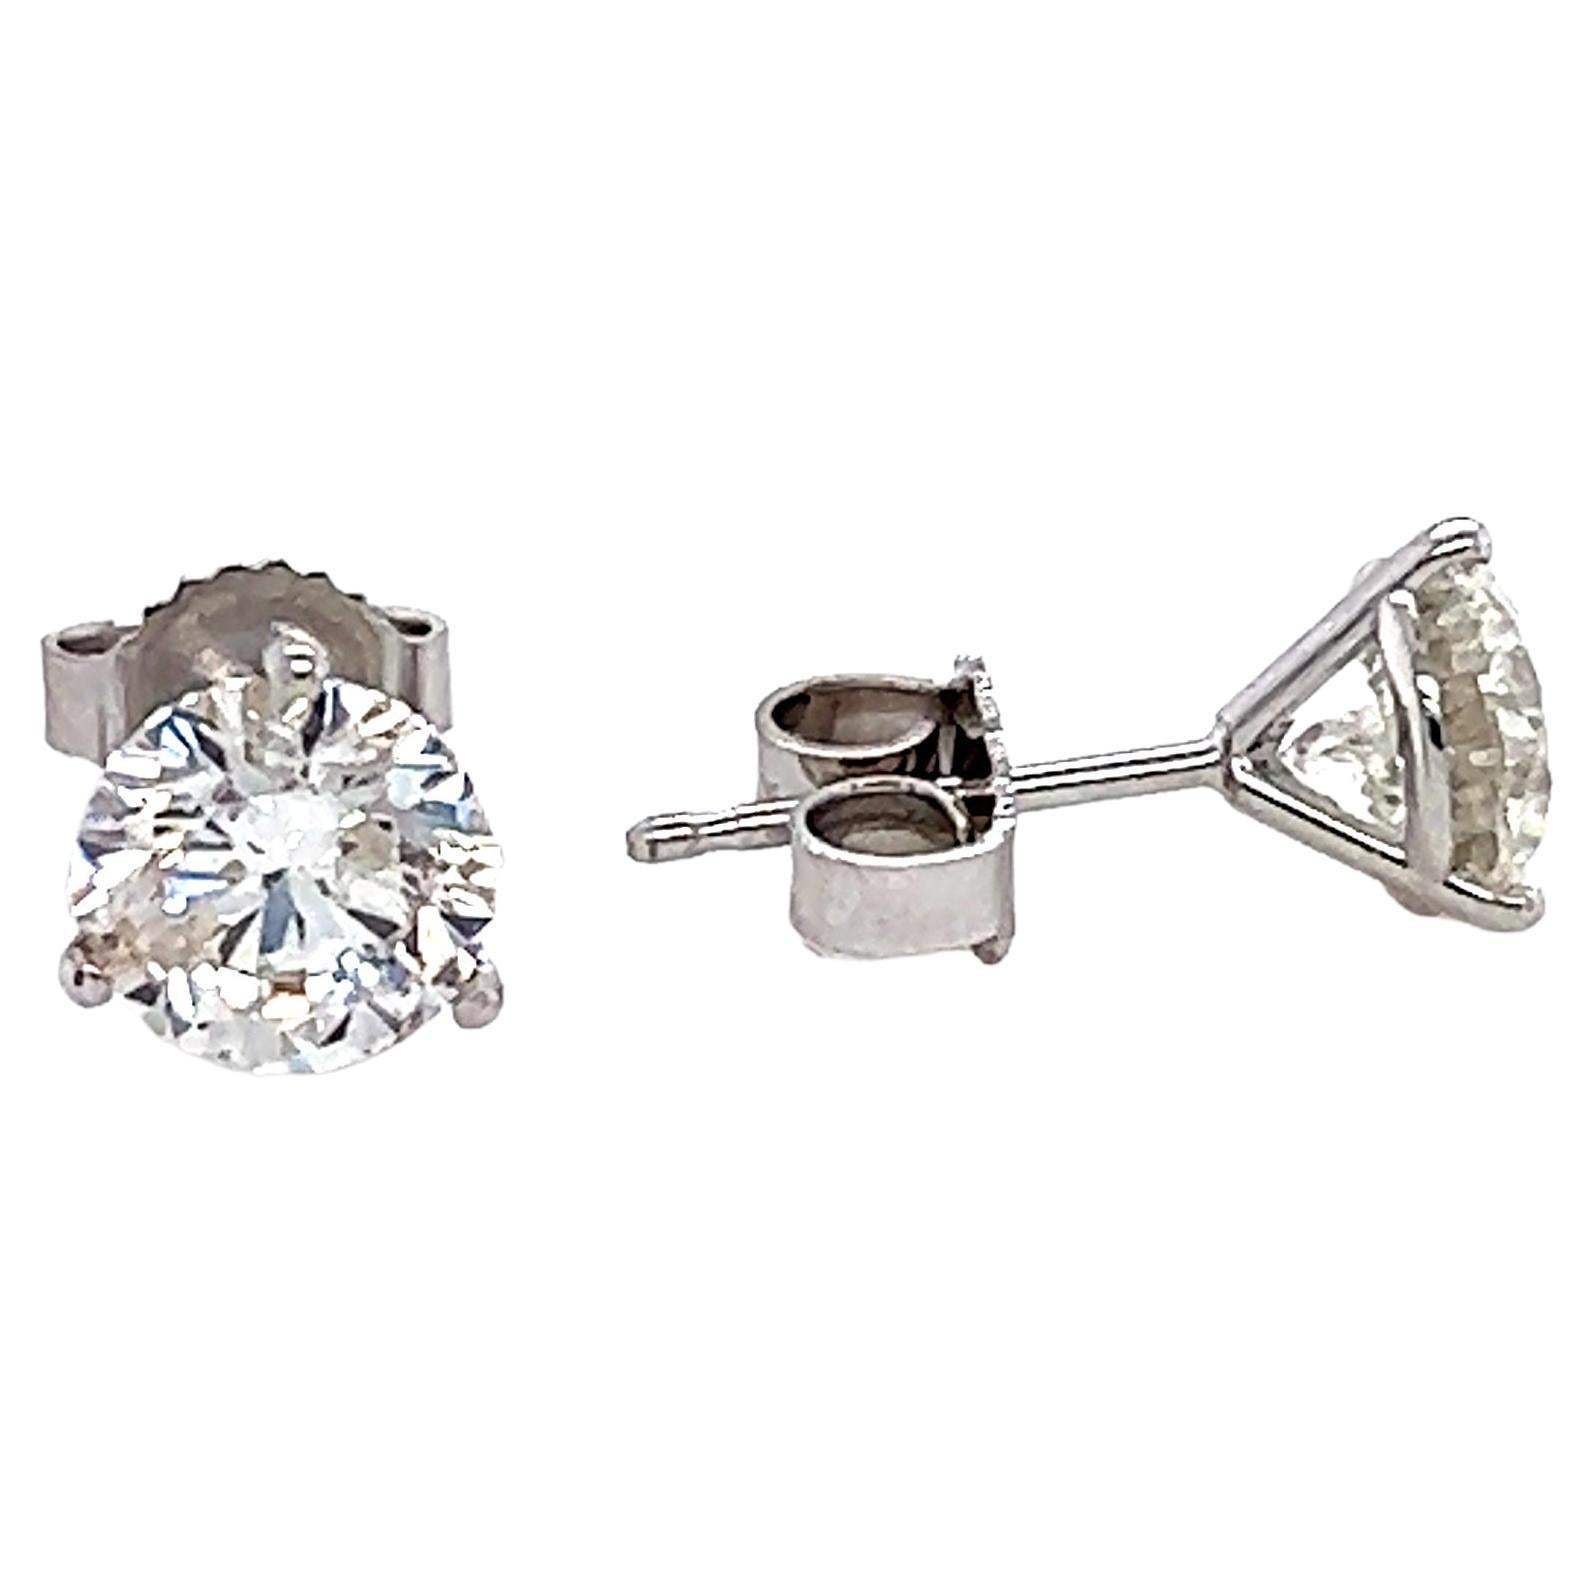 2.03 ct Round Diamond Solitaire Stud Earring in 14k White Gold

These round diamond solitaire stud earrings are crafted in lustrous 14-karat white gold and feature round-cut, prong-set in a classic solitaire stud design. With exquisite luster and